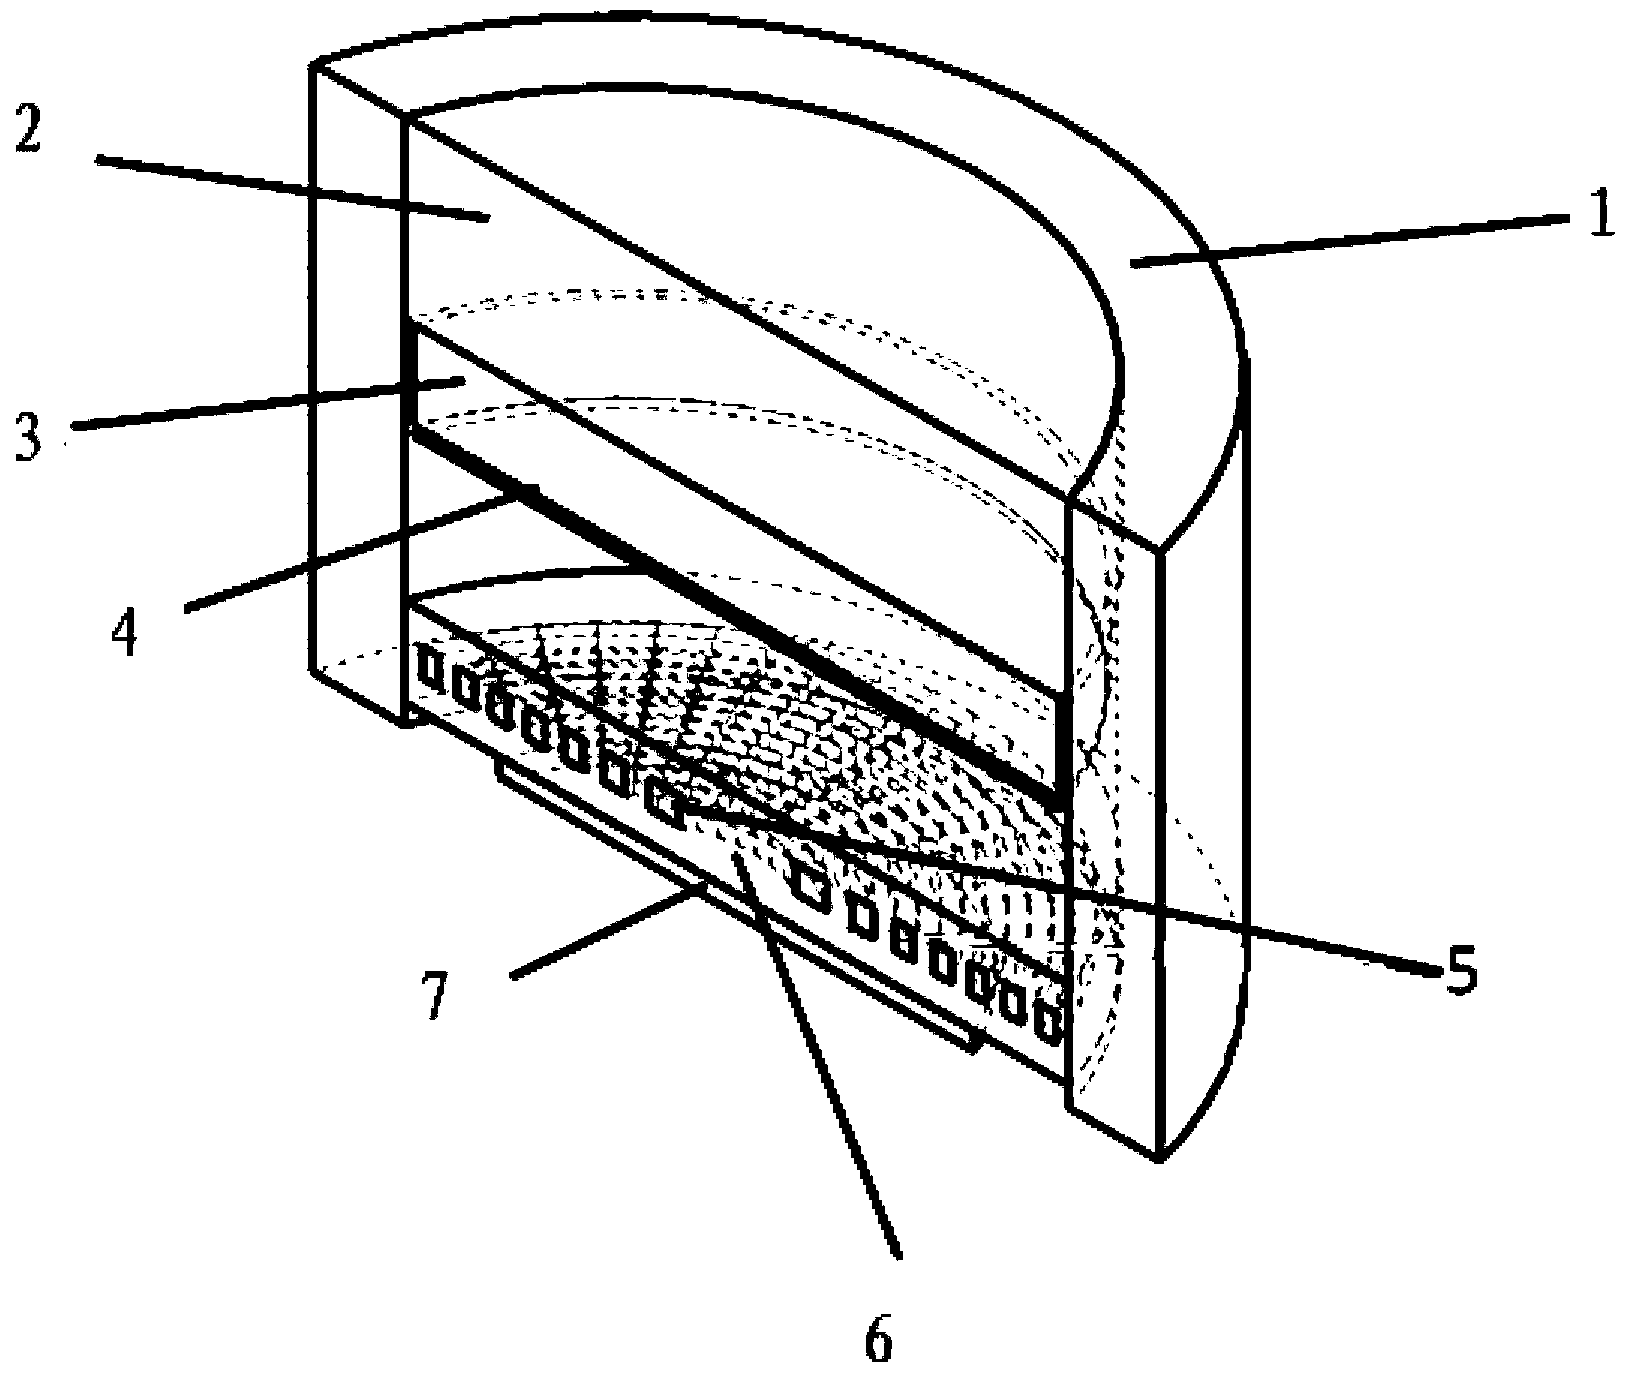 Composite type electric generator based on electromagnetism and friction principle